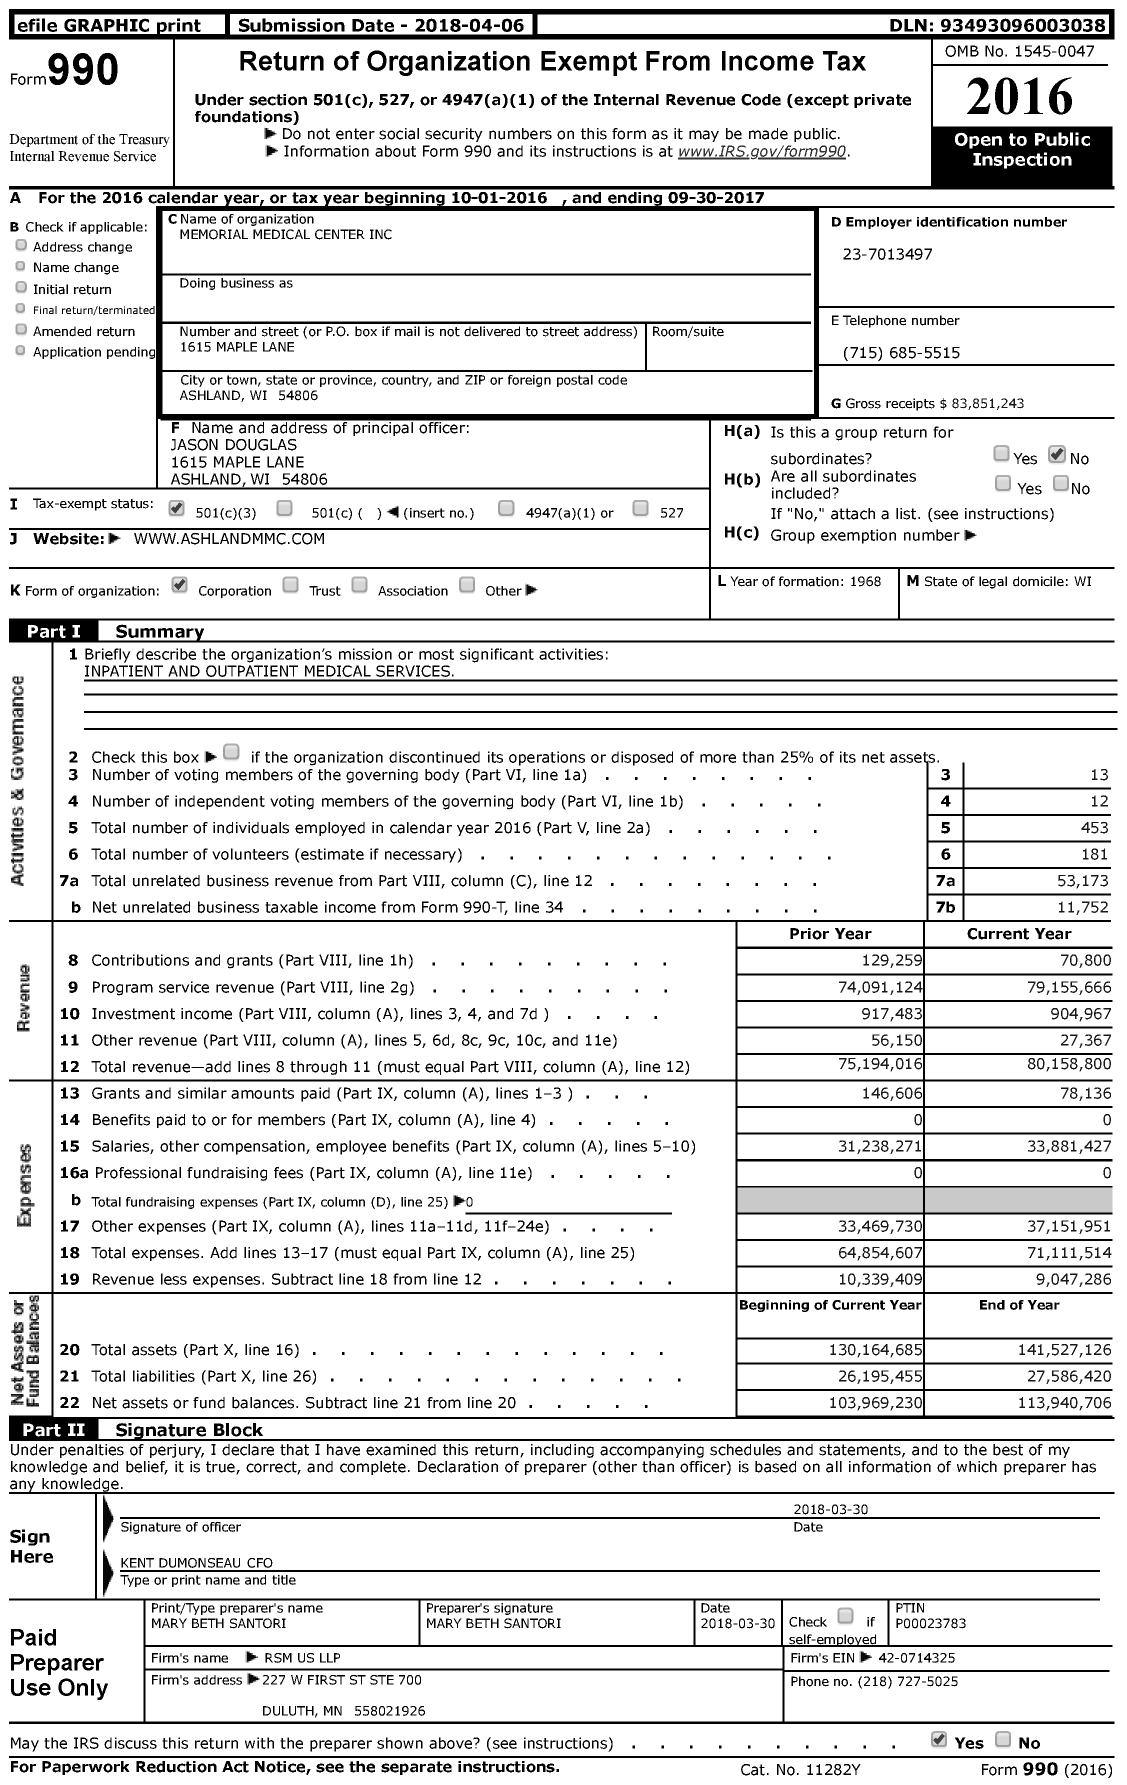 Image of first page of 2016 Form 990 for Memorial Medical Center (MMC)